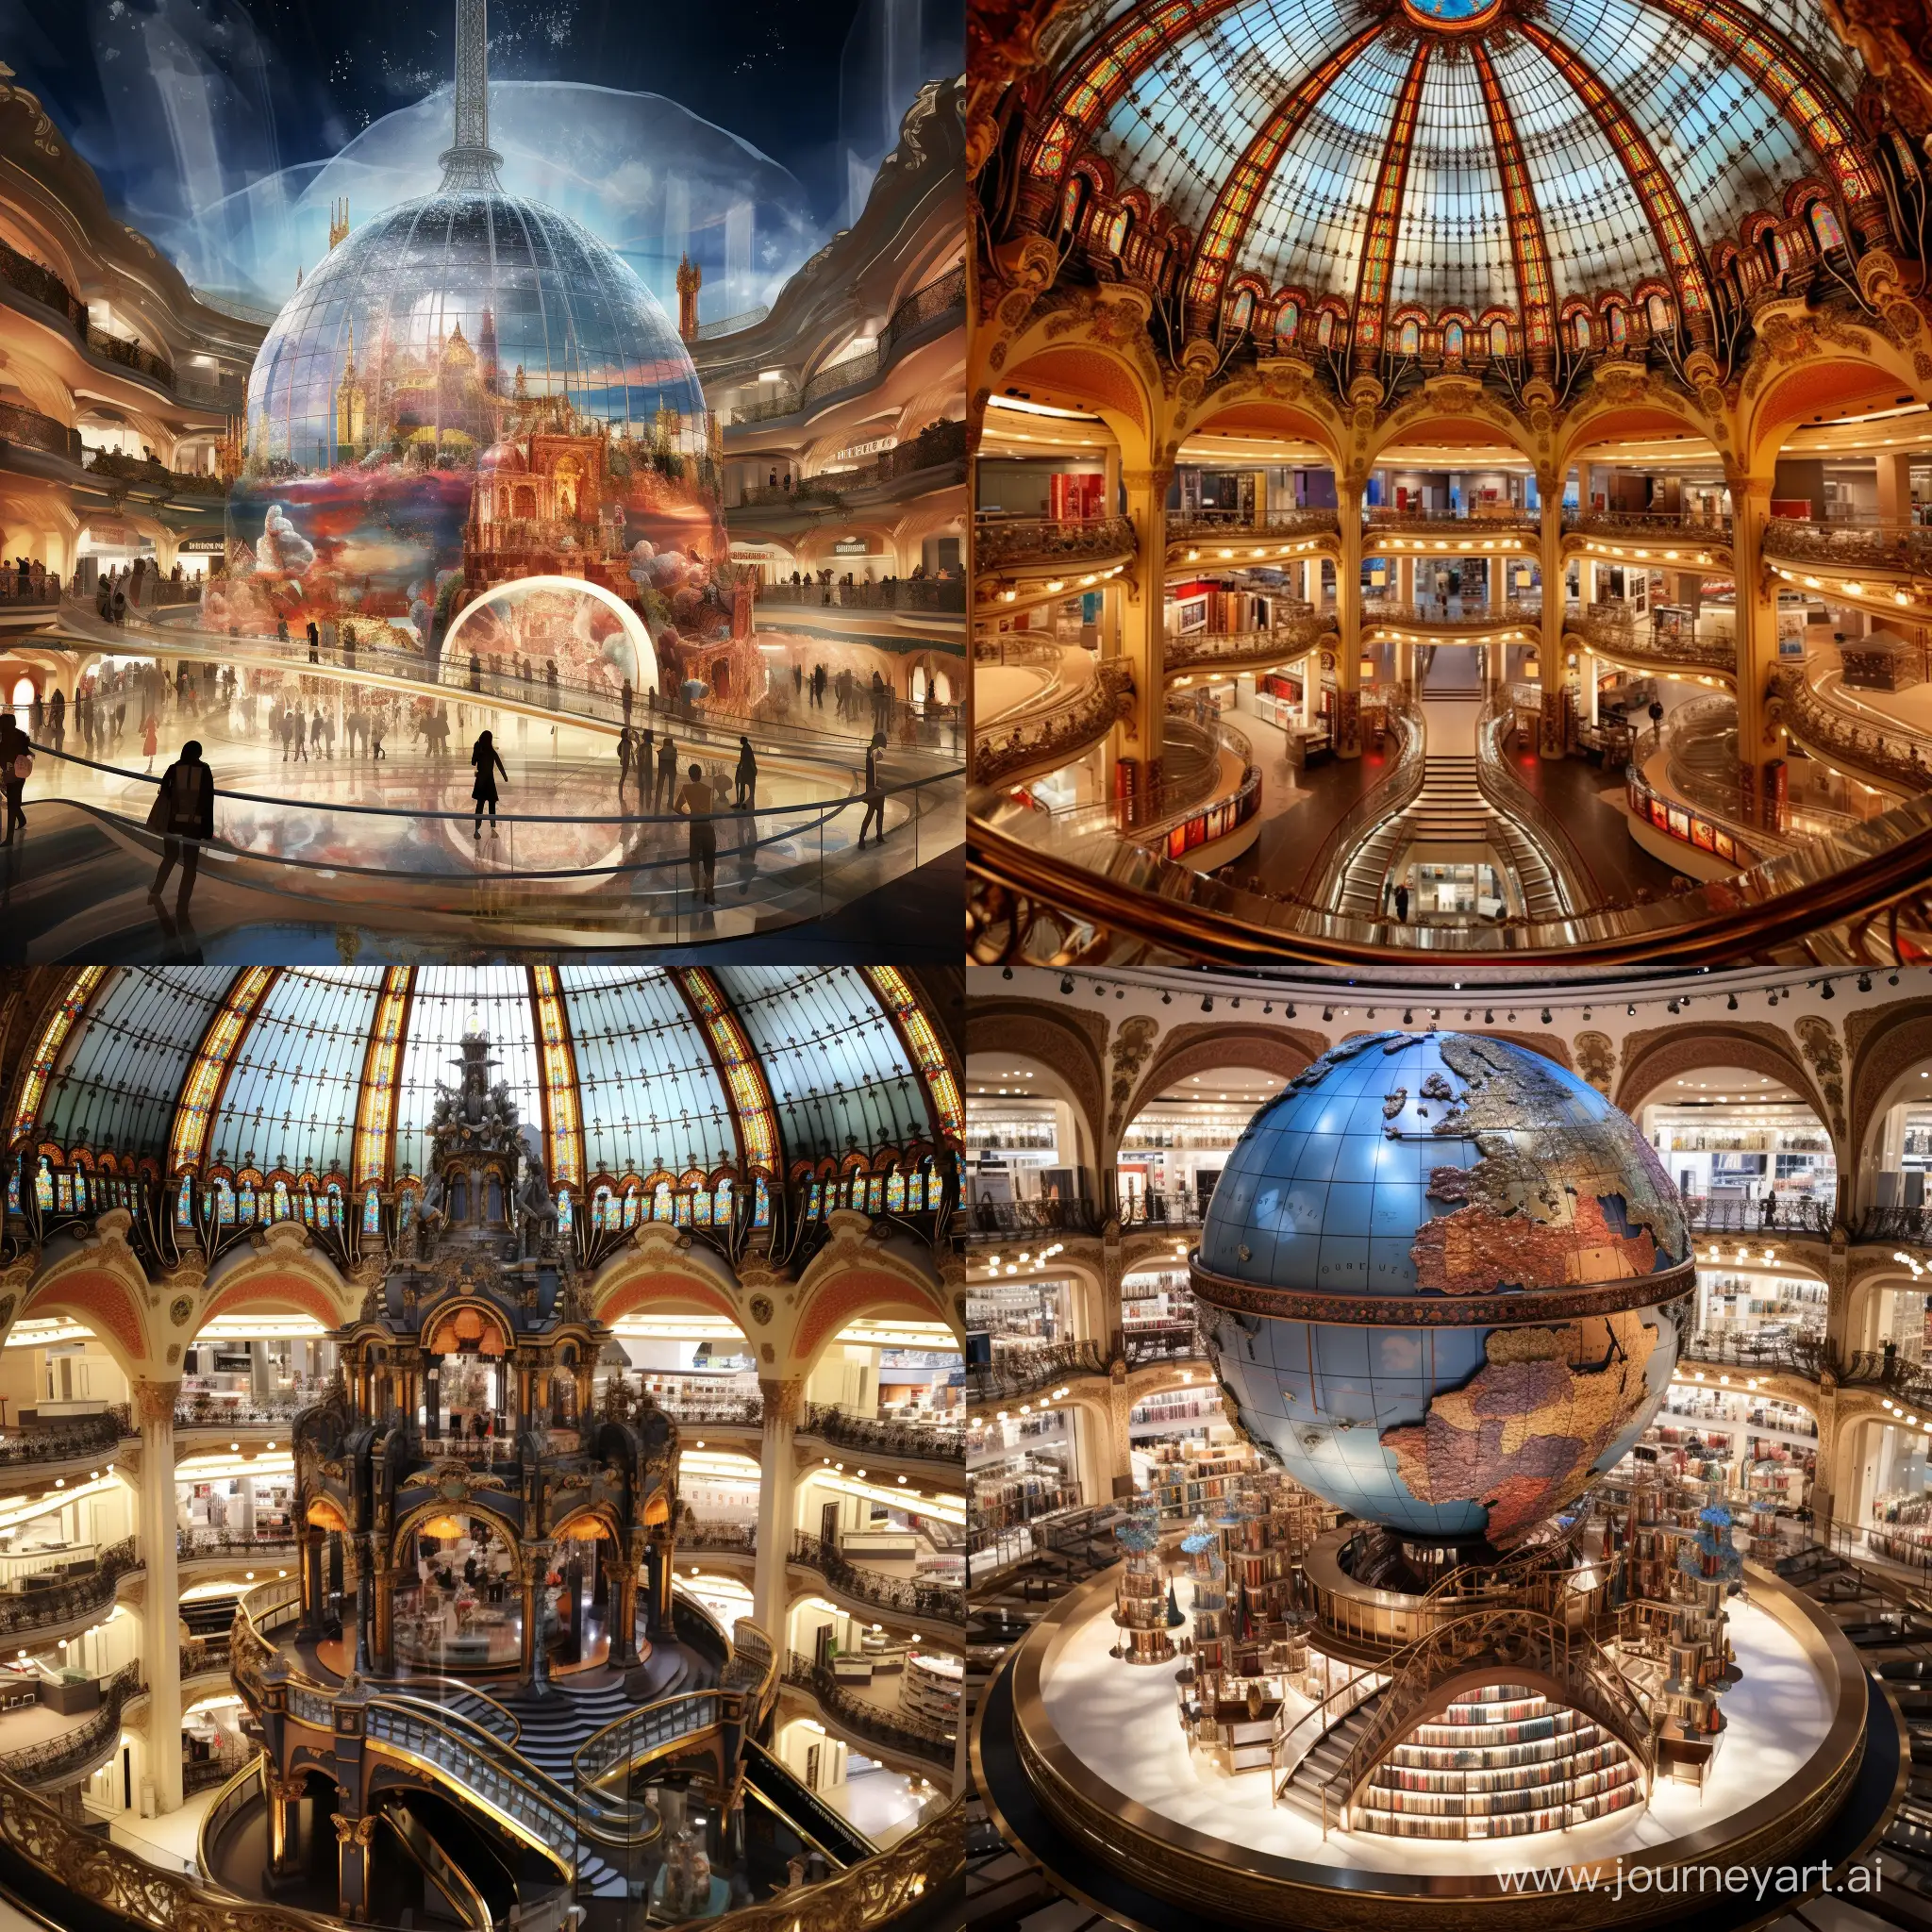 Futuristic-Shopping-Experience-Under-the-Dome-of-Galeries-Lafayette